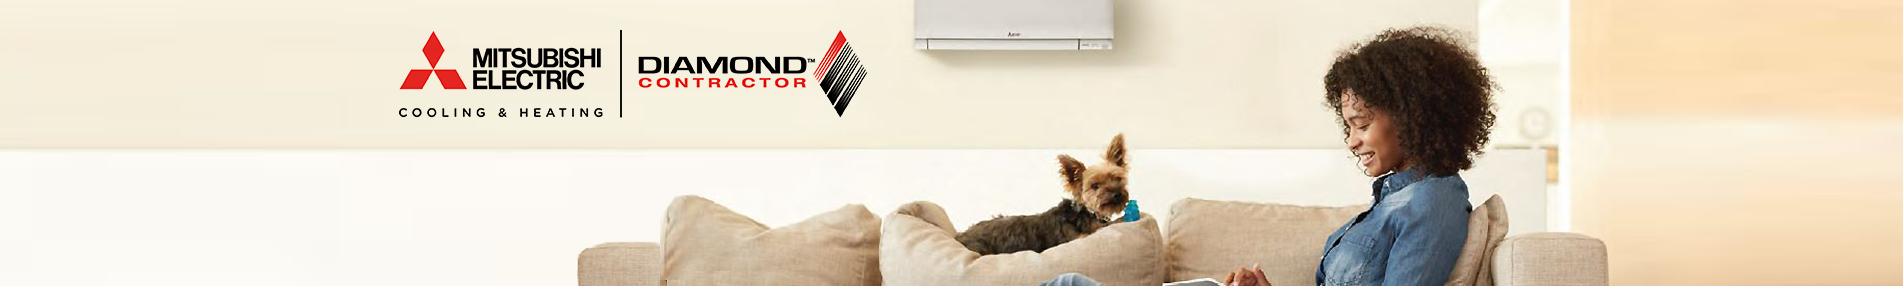 ductless mini split cool to heat Wattson Home Solutions mass